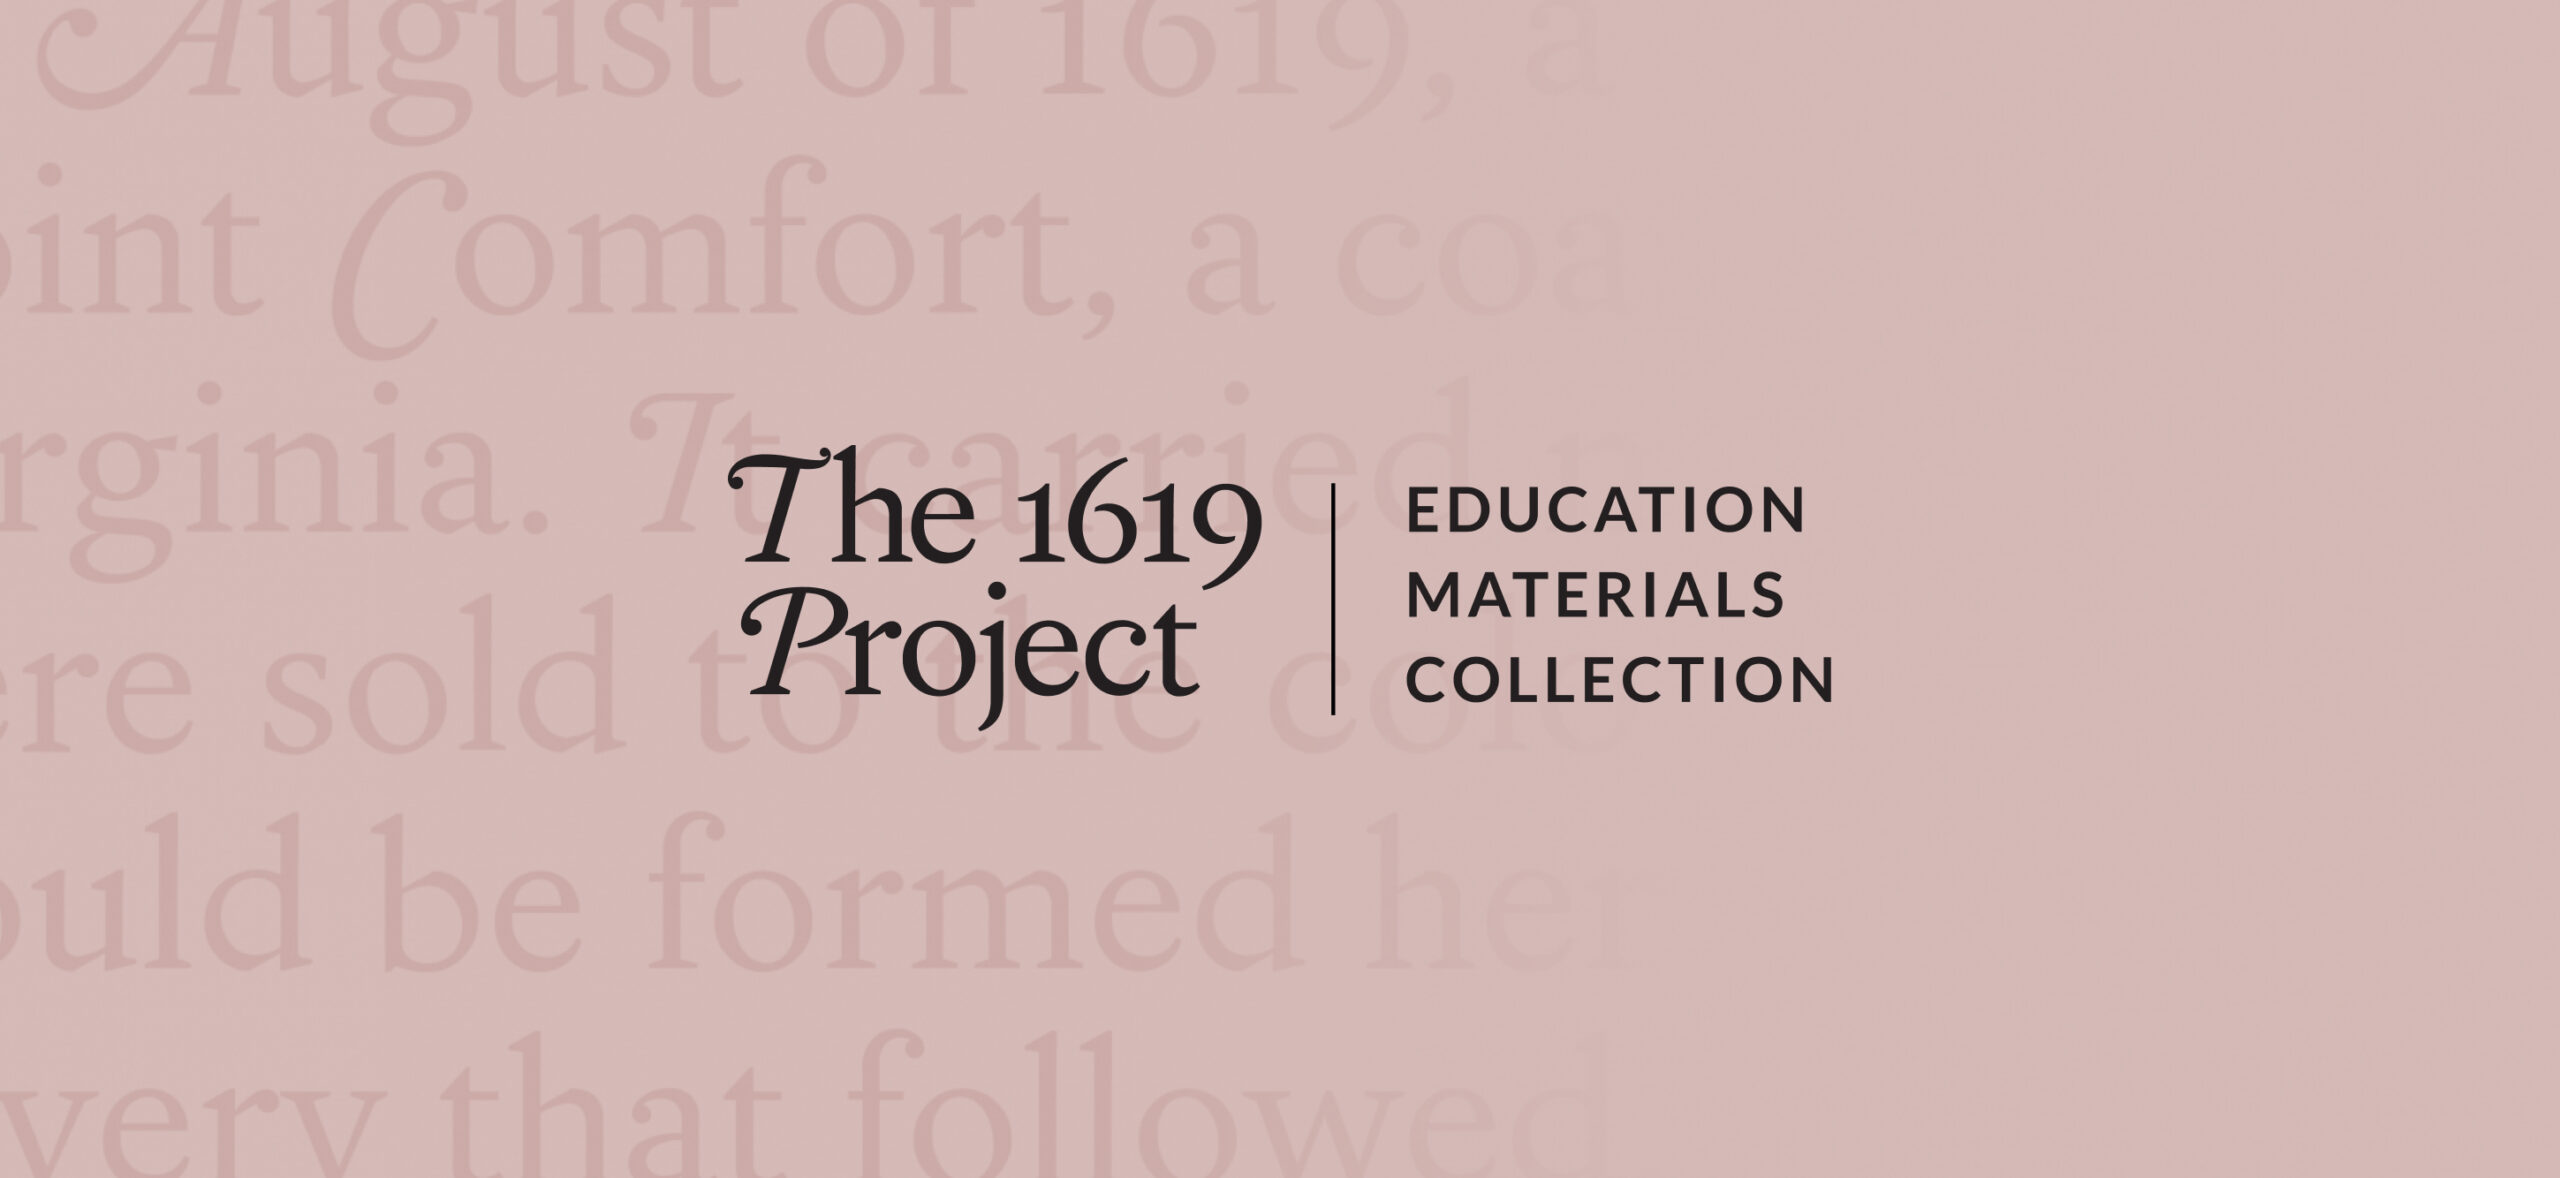 The 1619 Project | Education Materials Collection logo.